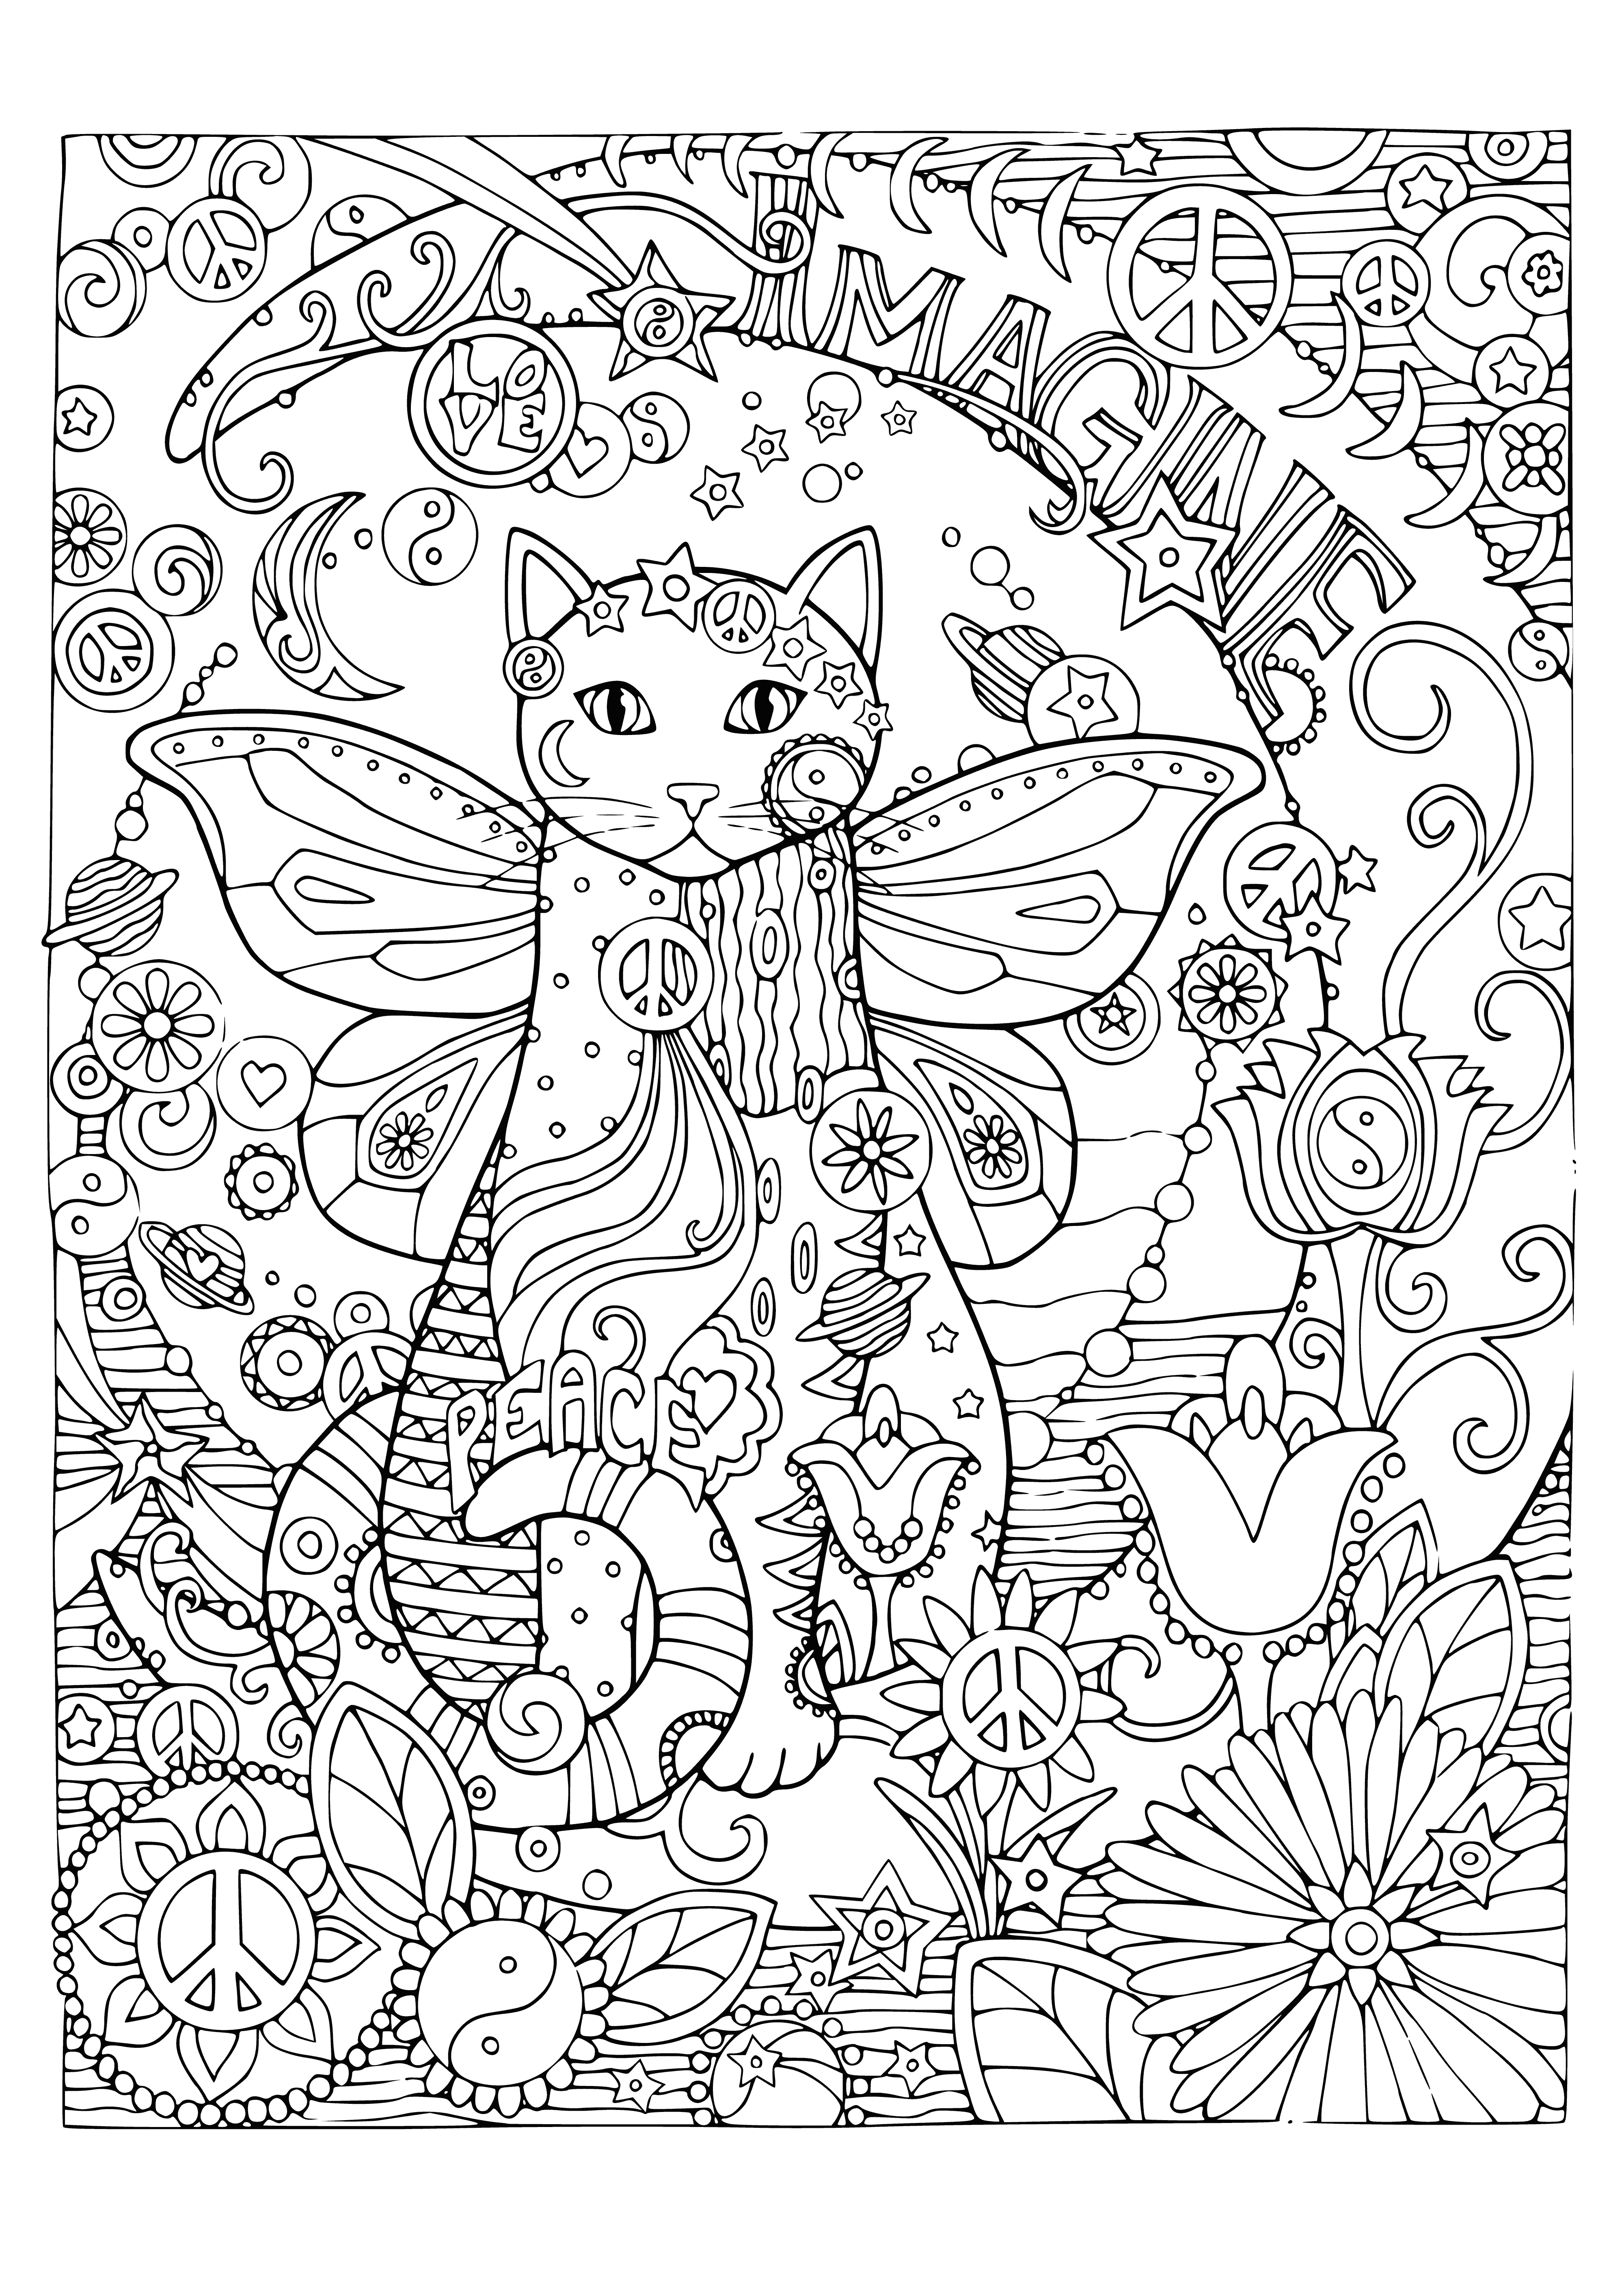 coloring page: A black cat basks contentedly on a branch, ready to take on the world with its full stomach and sharp claws.